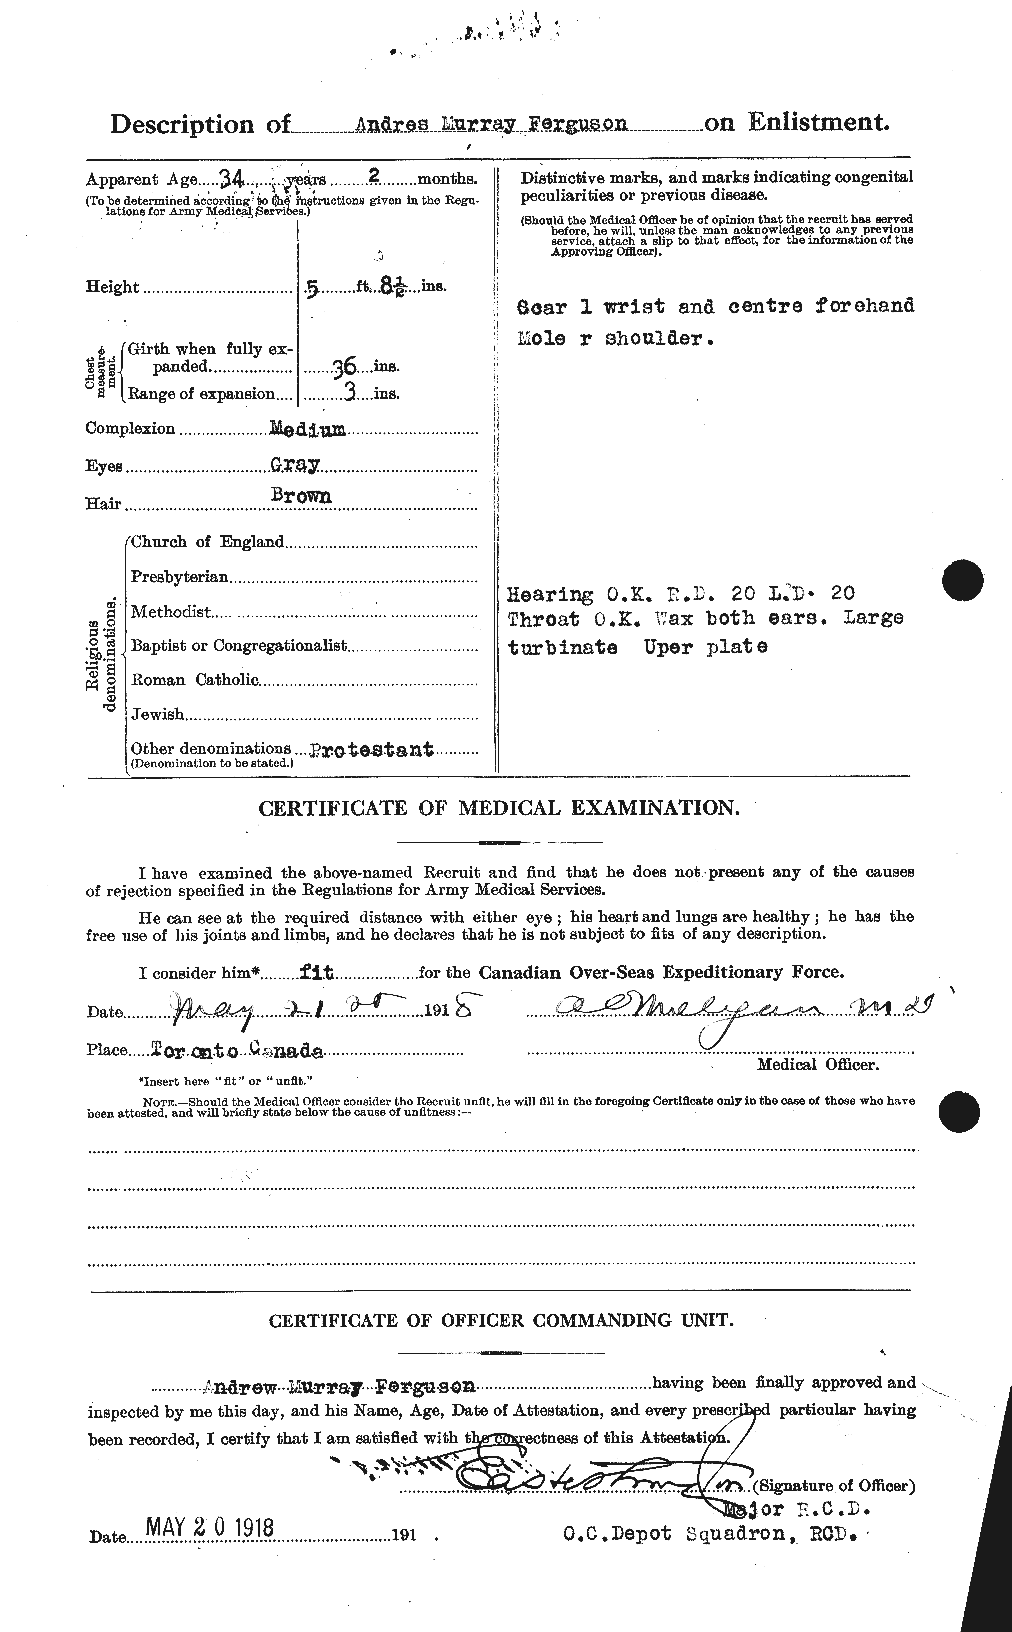 Personnel Records of the First World War - CEF 318886b